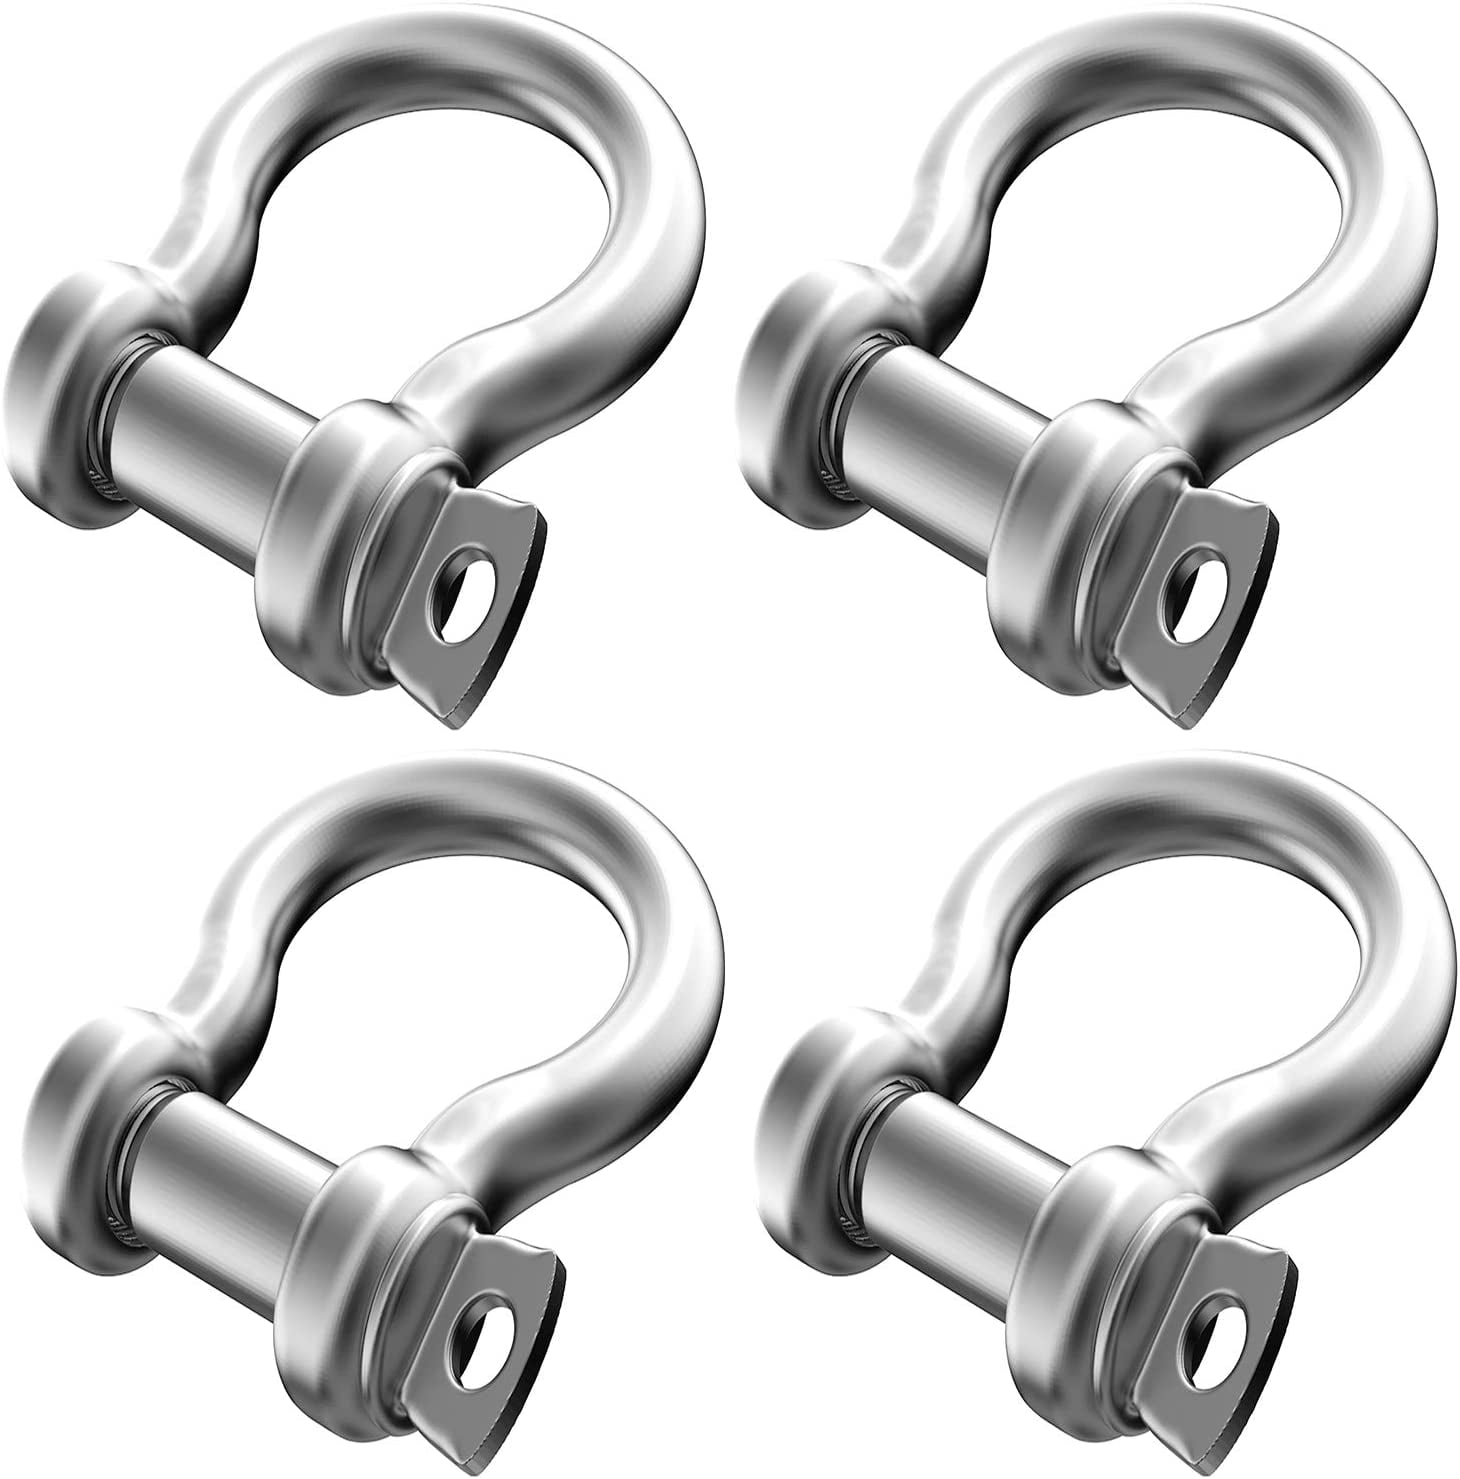 4 pack 5/16" Screw Pin Anchor Shackle Clevis D Ring Lifting 3/4 Ton Galvanized